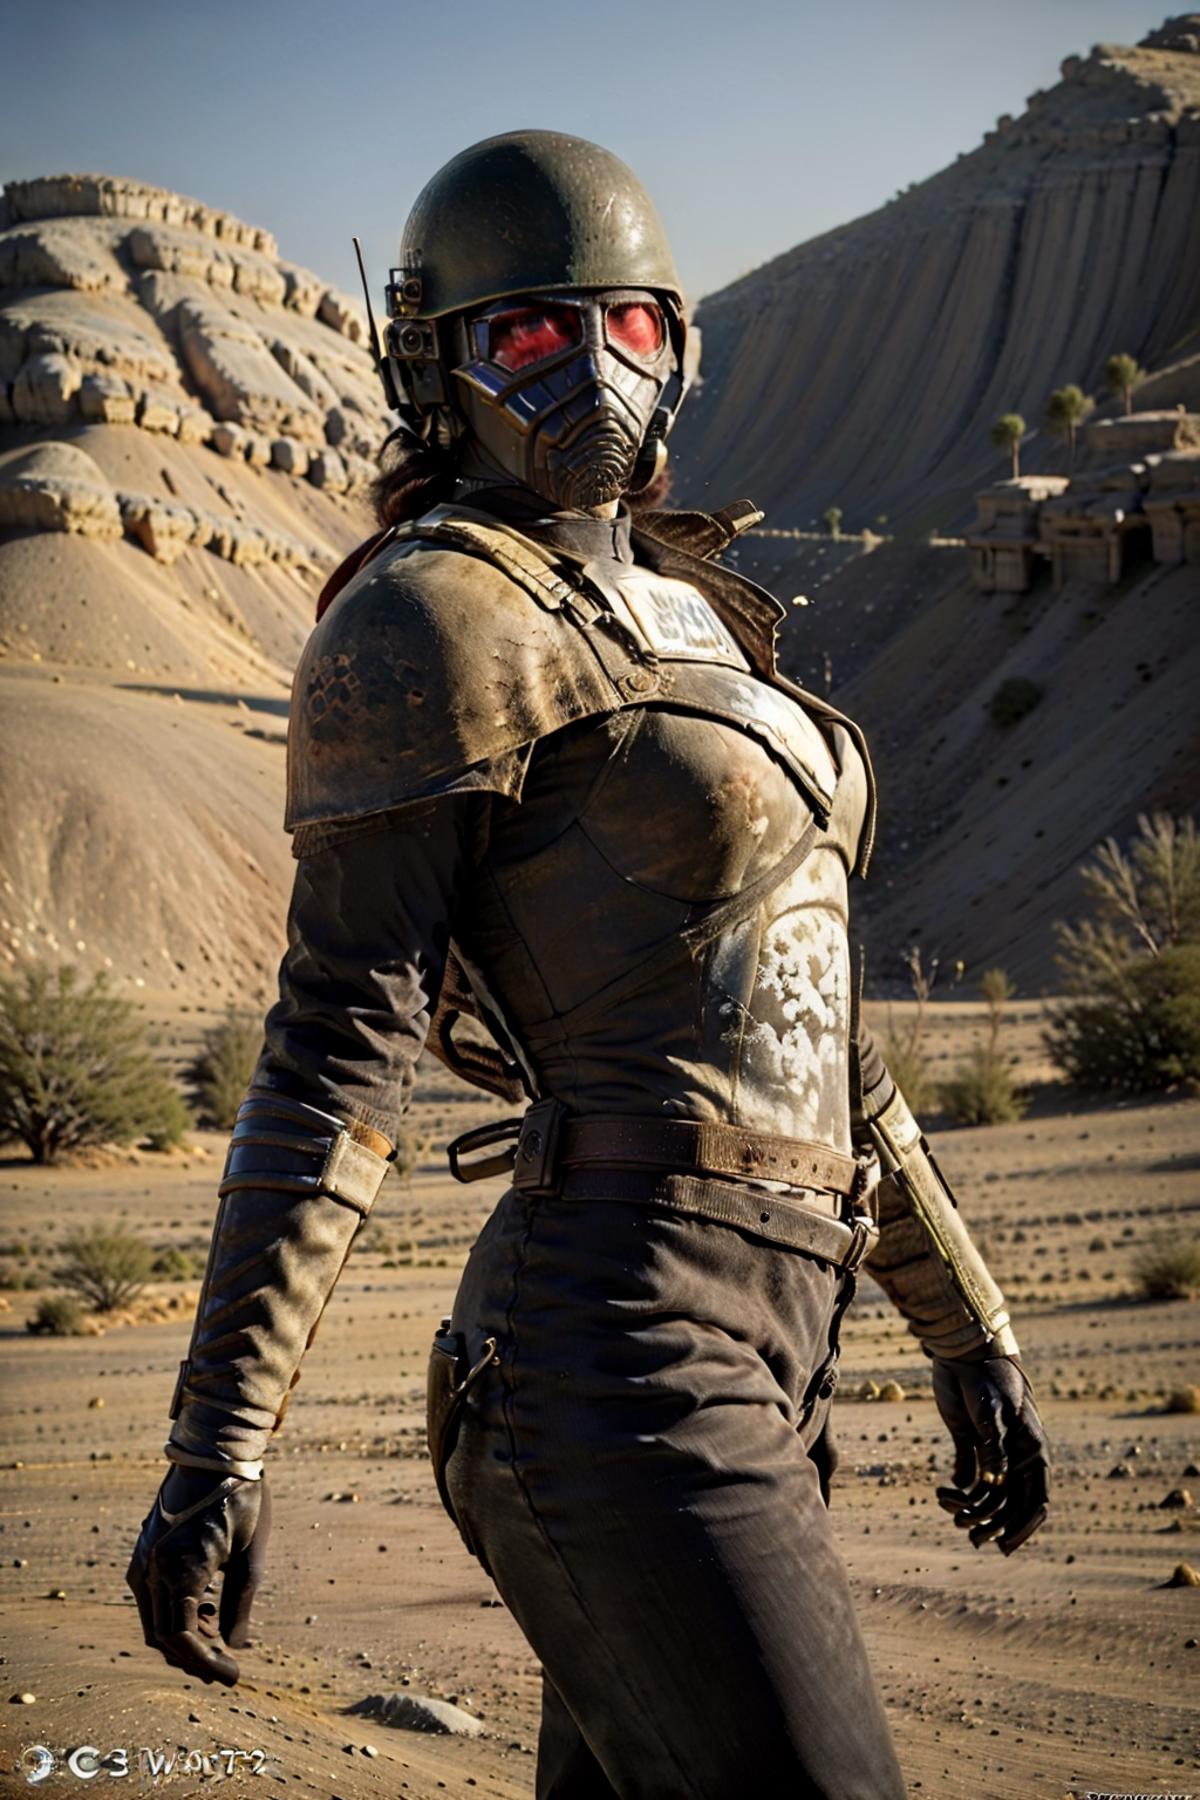 Combat Ranger from Fallout New Vegas image by Darknoice